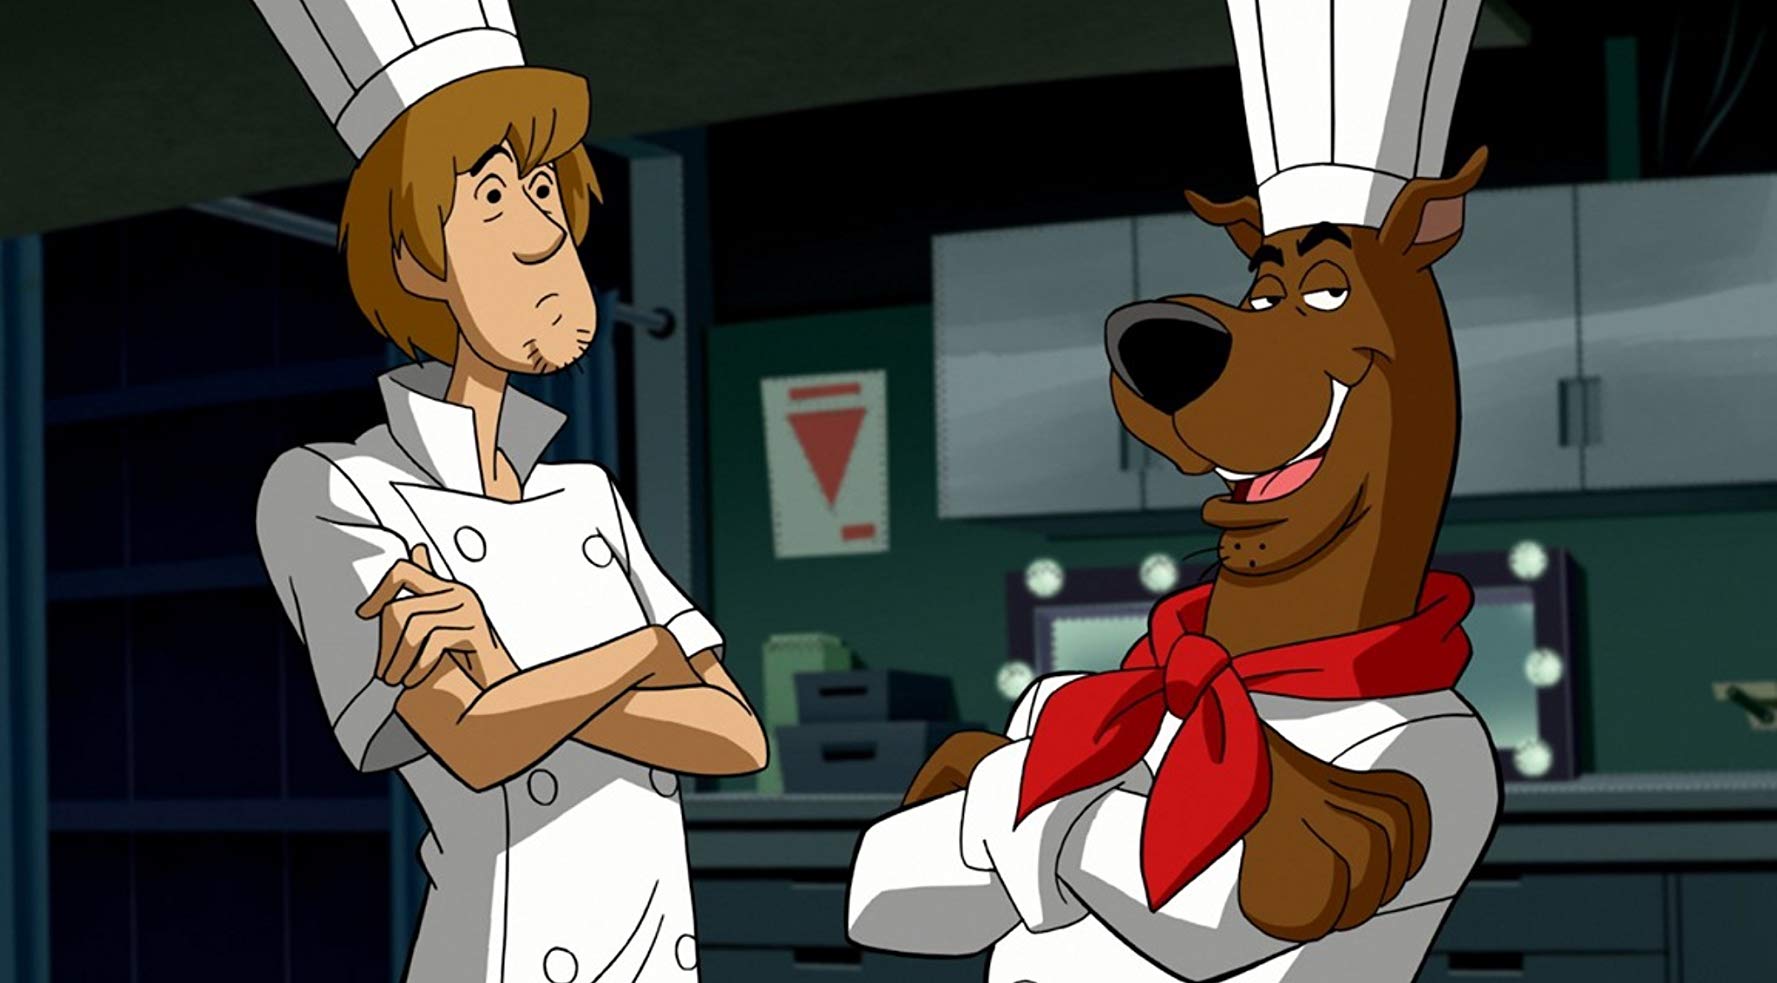 Watch Scooby-Doo! and the Gourmet Ghost